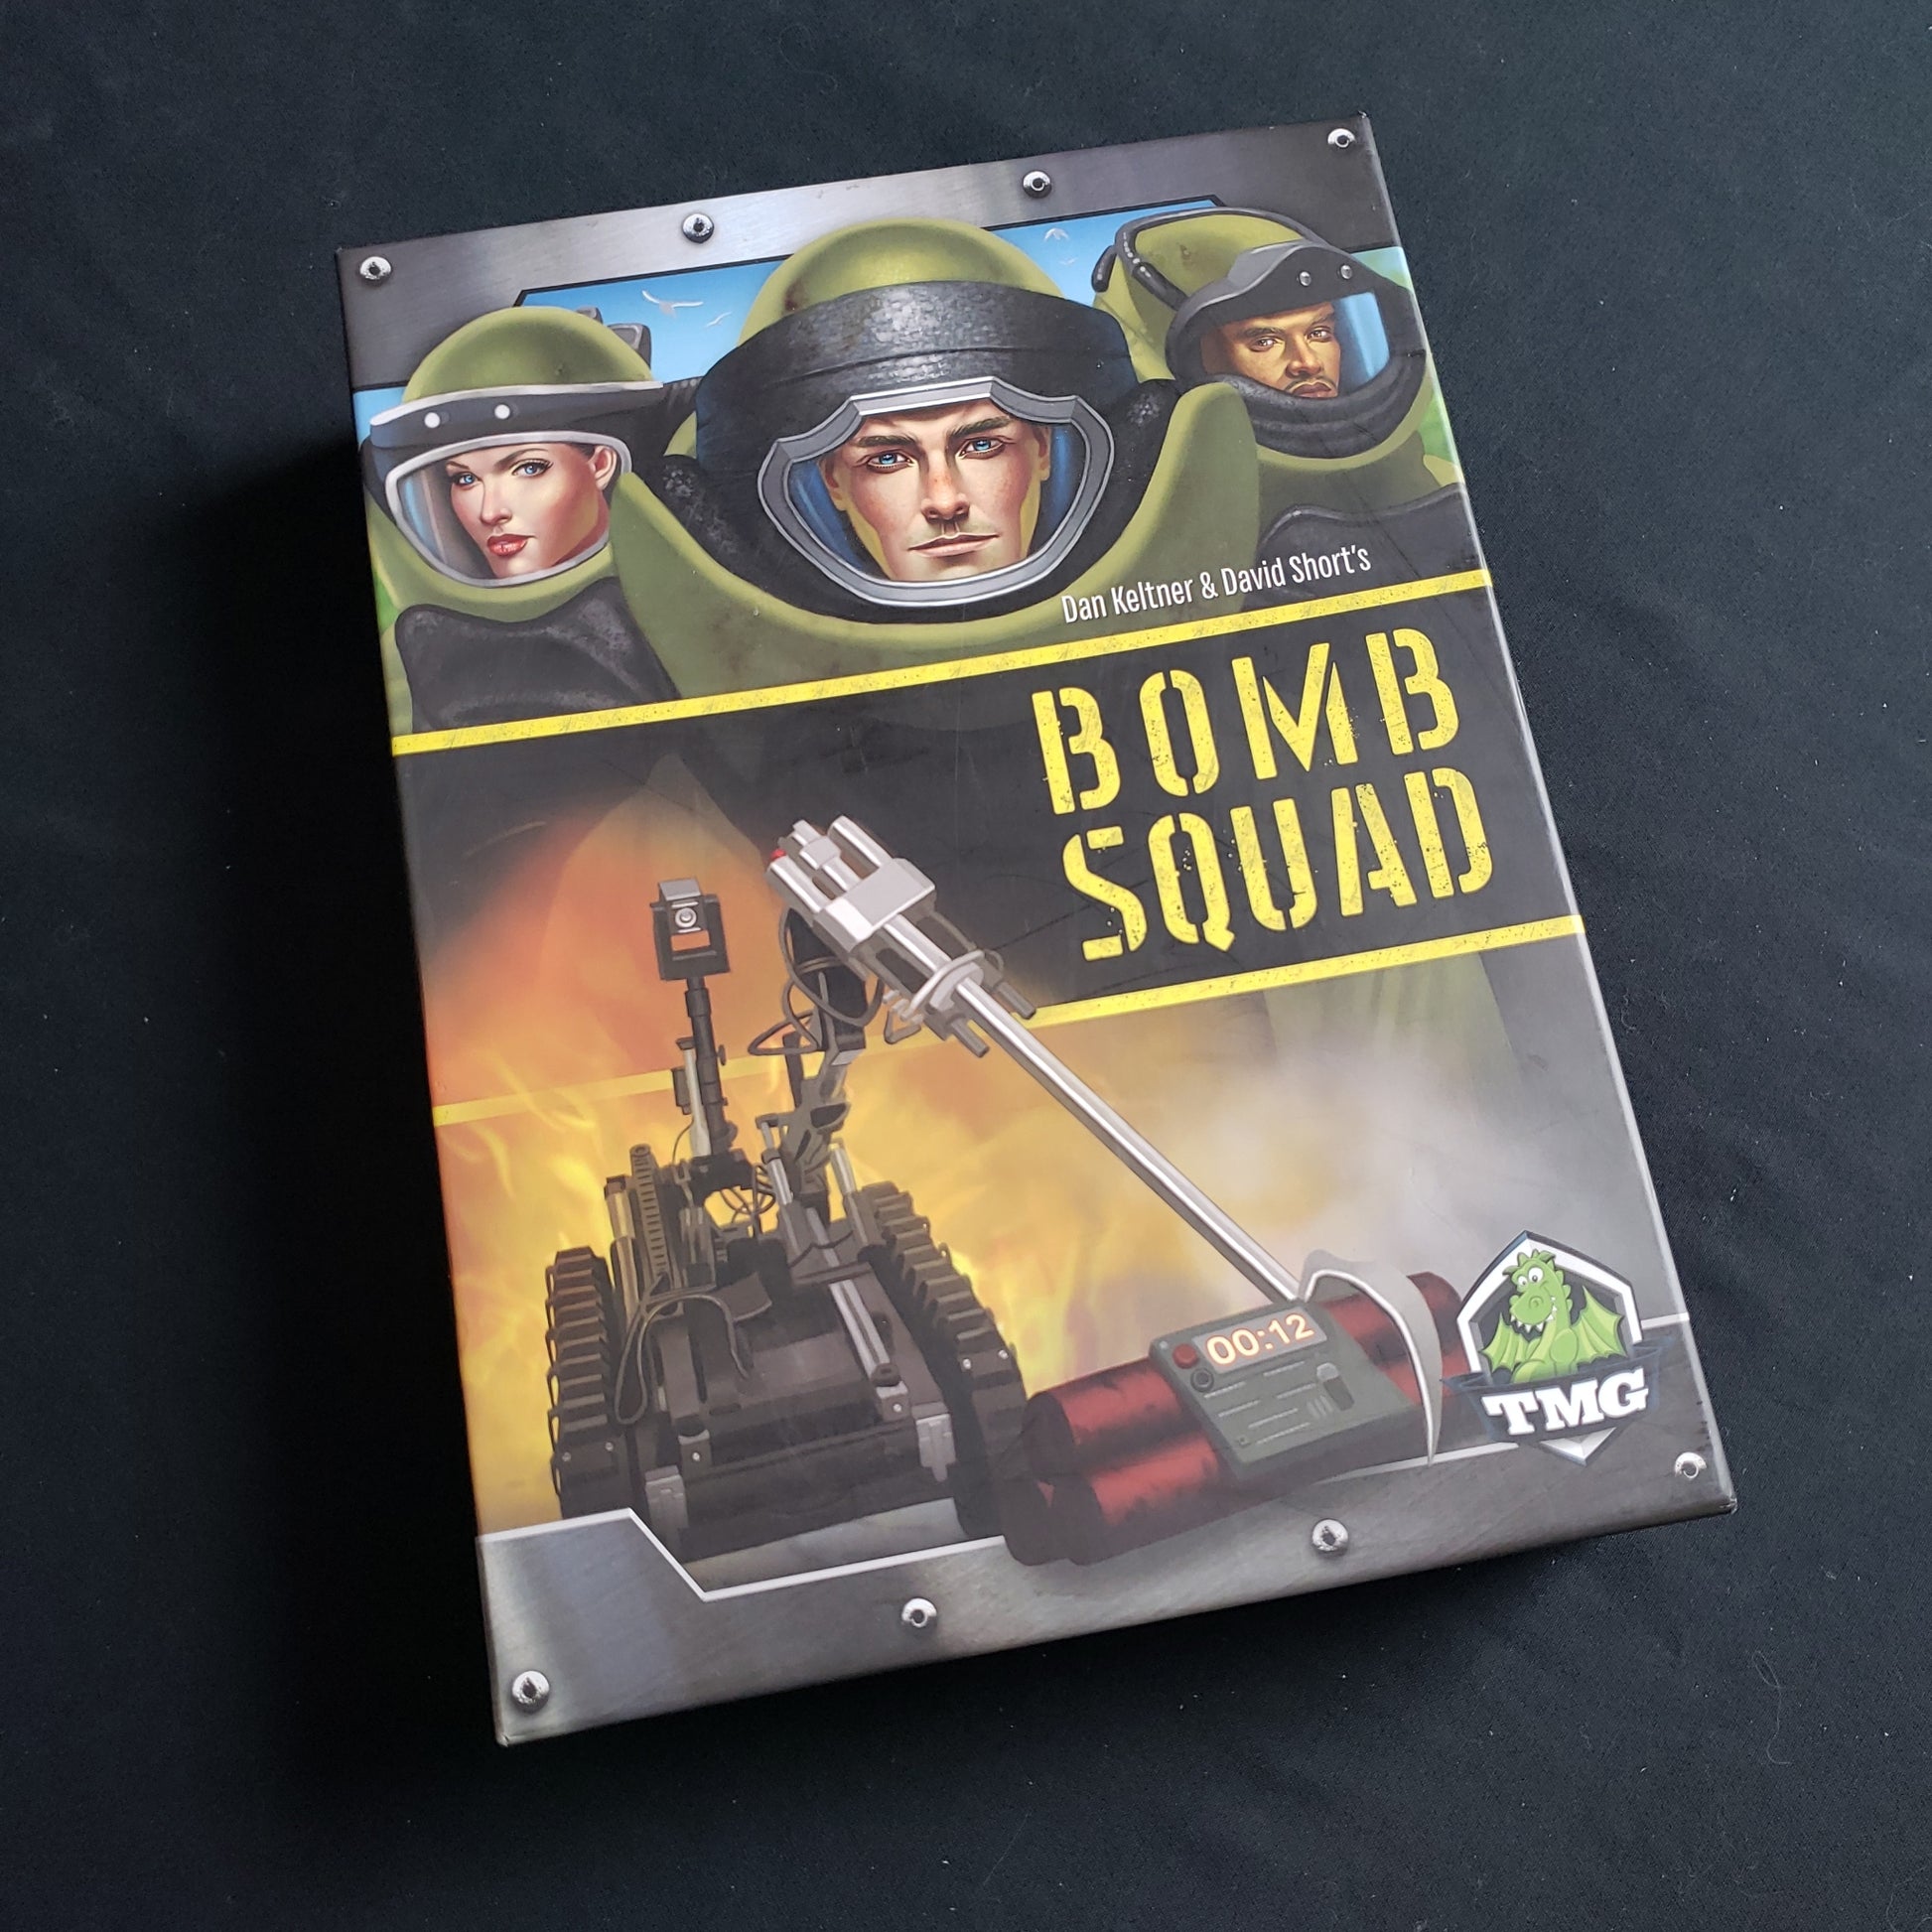 Image shows the front cover of the box of the Bomb Squad board game